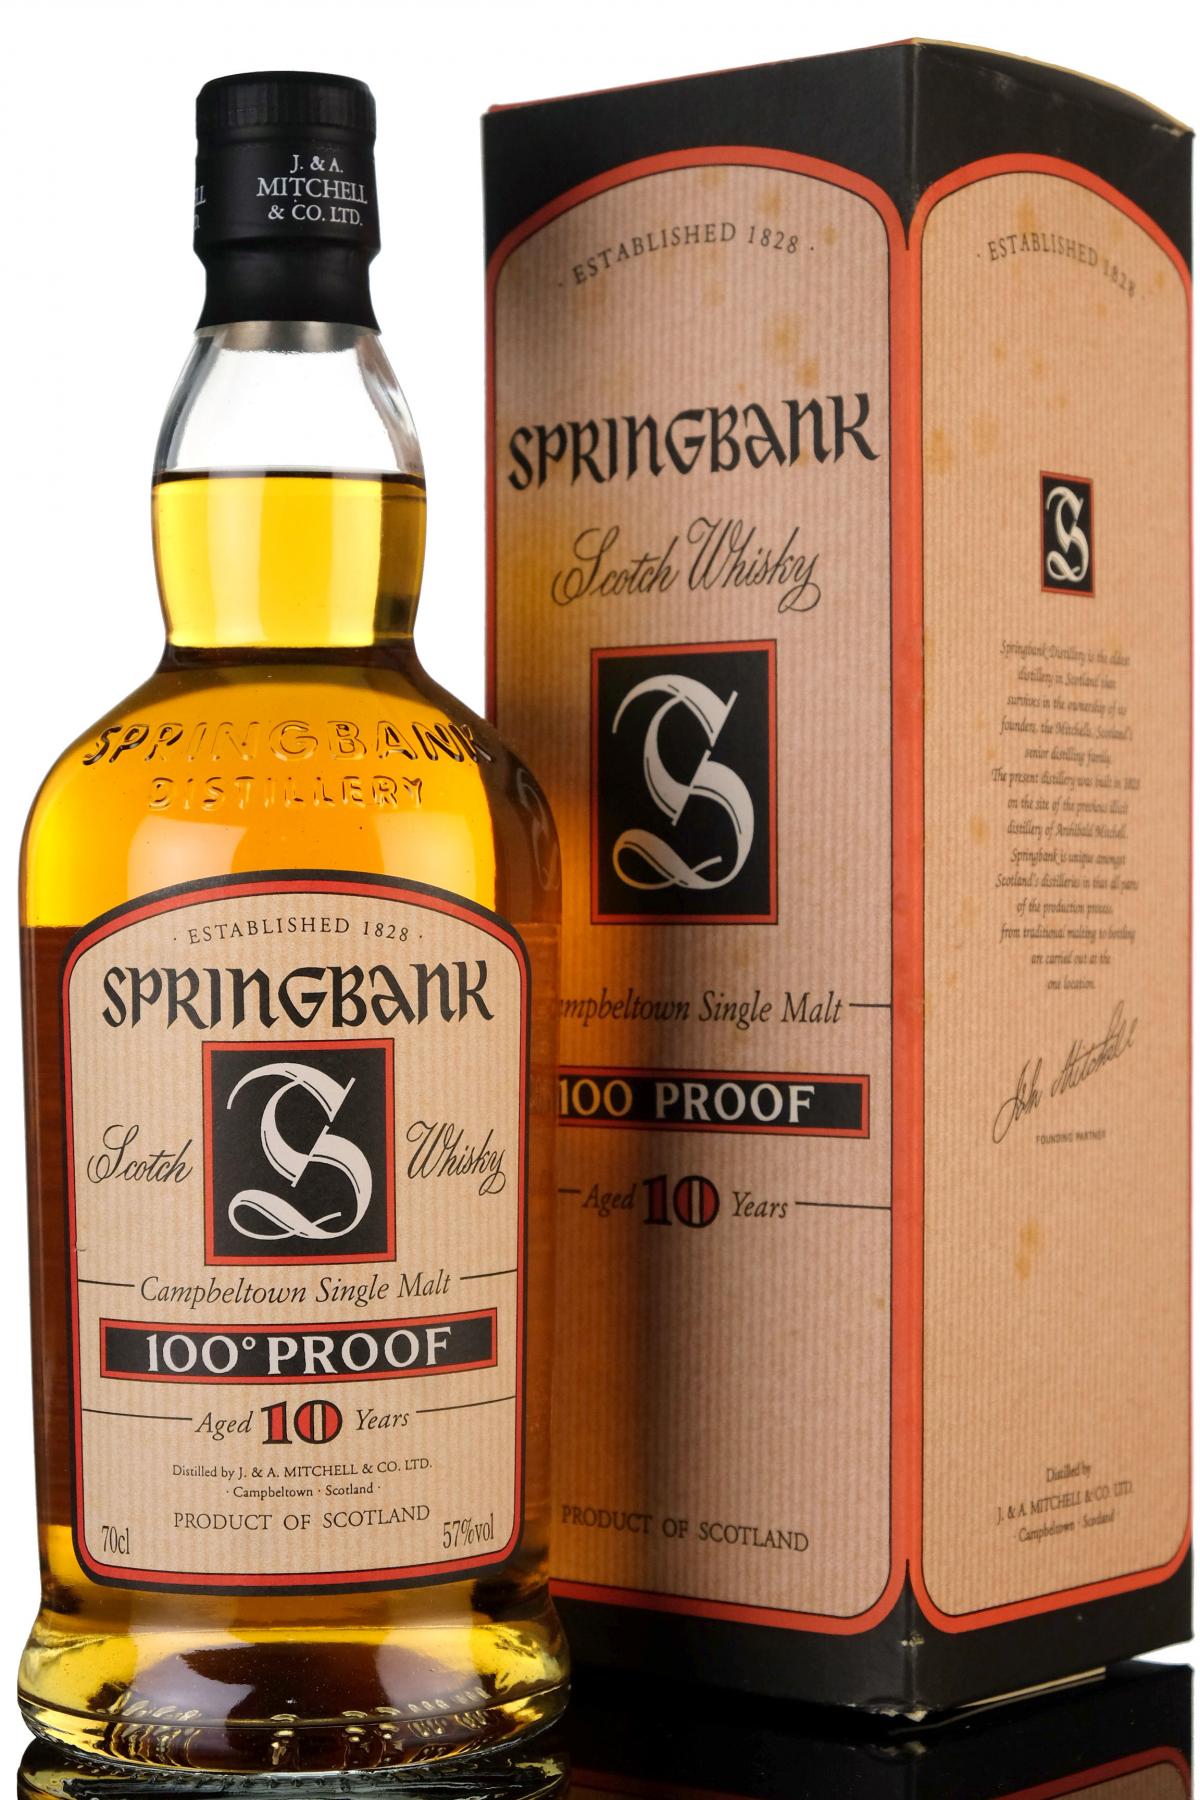 Springbank 10 Year Old - 100 Proof